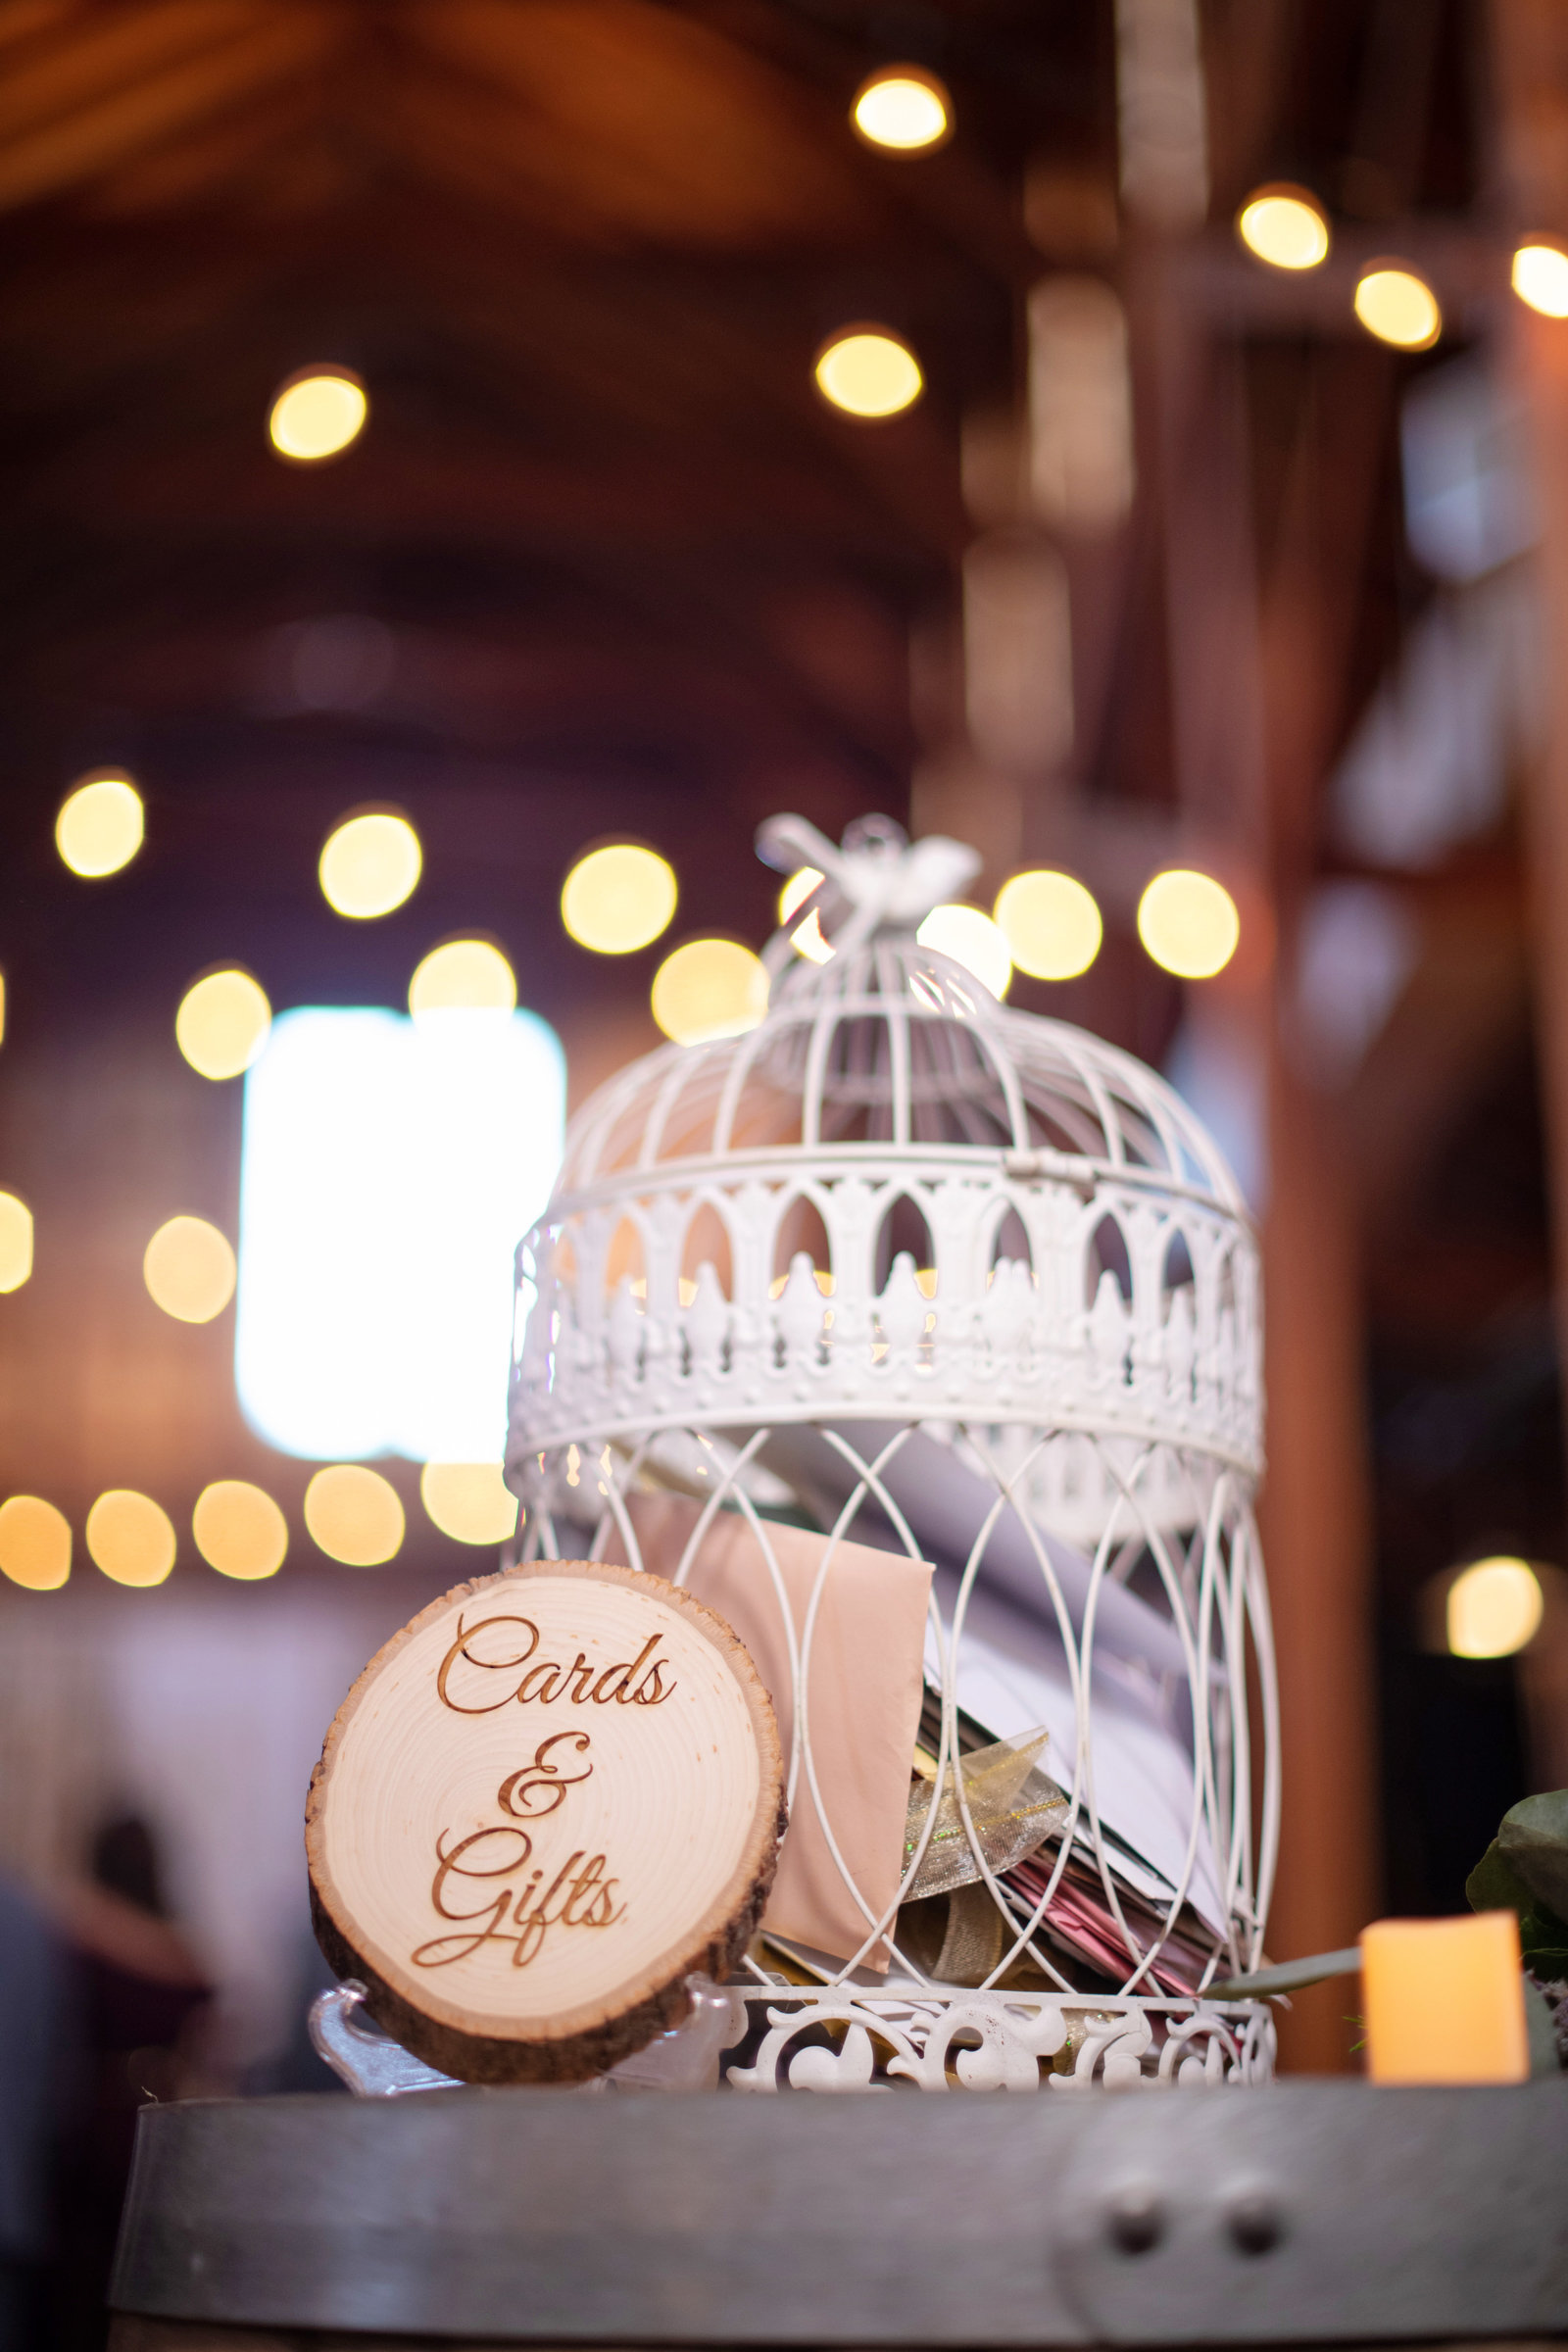 cards and gifts box at wedding, The Barn at Old Bethpage